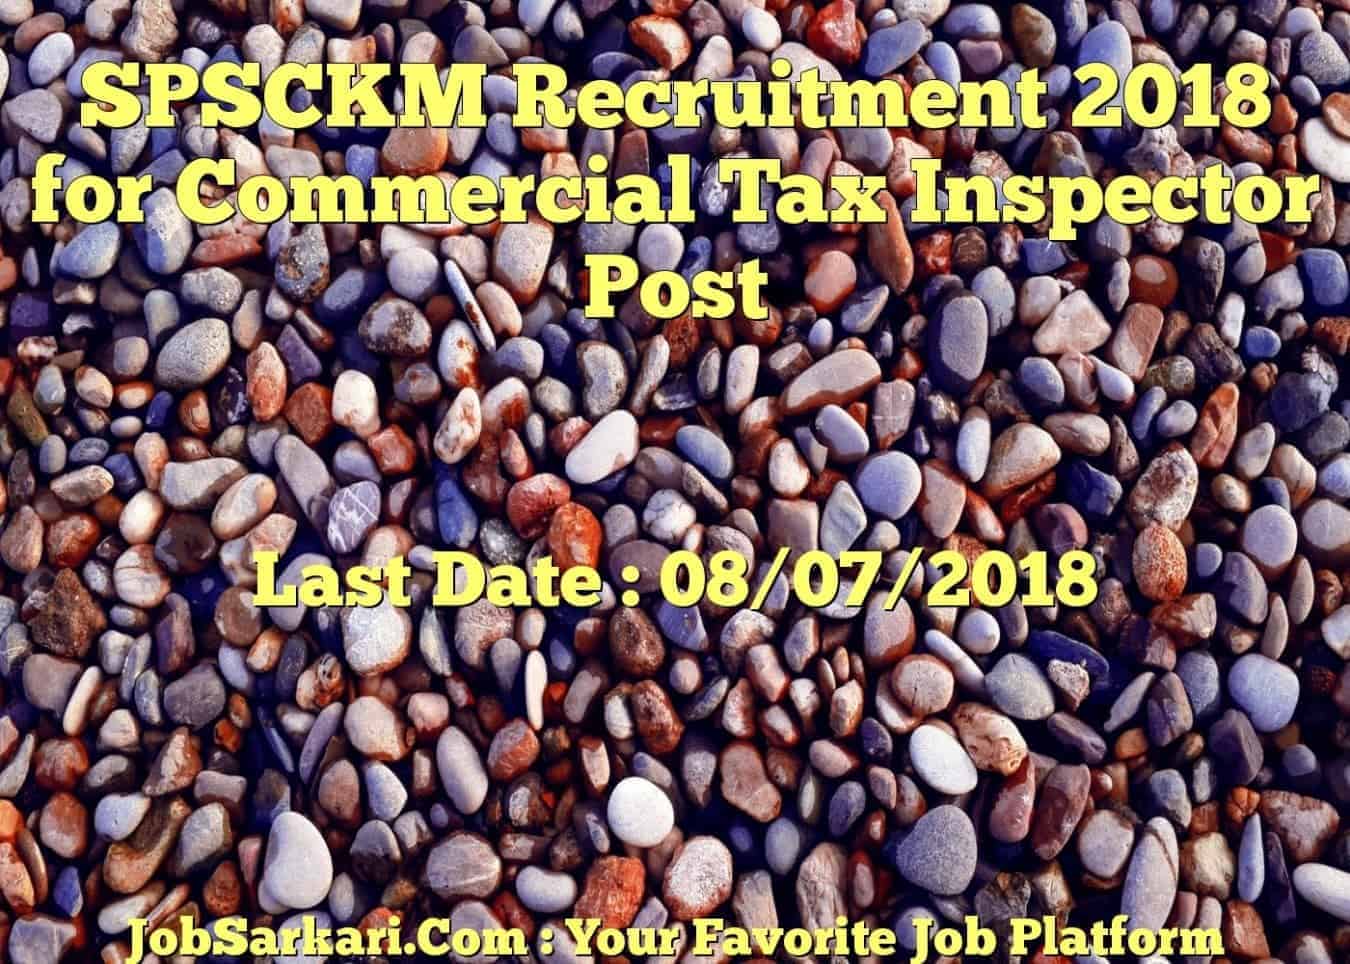 SPSCKM Recruitment 2018 for Commercial Tax Inspector Post